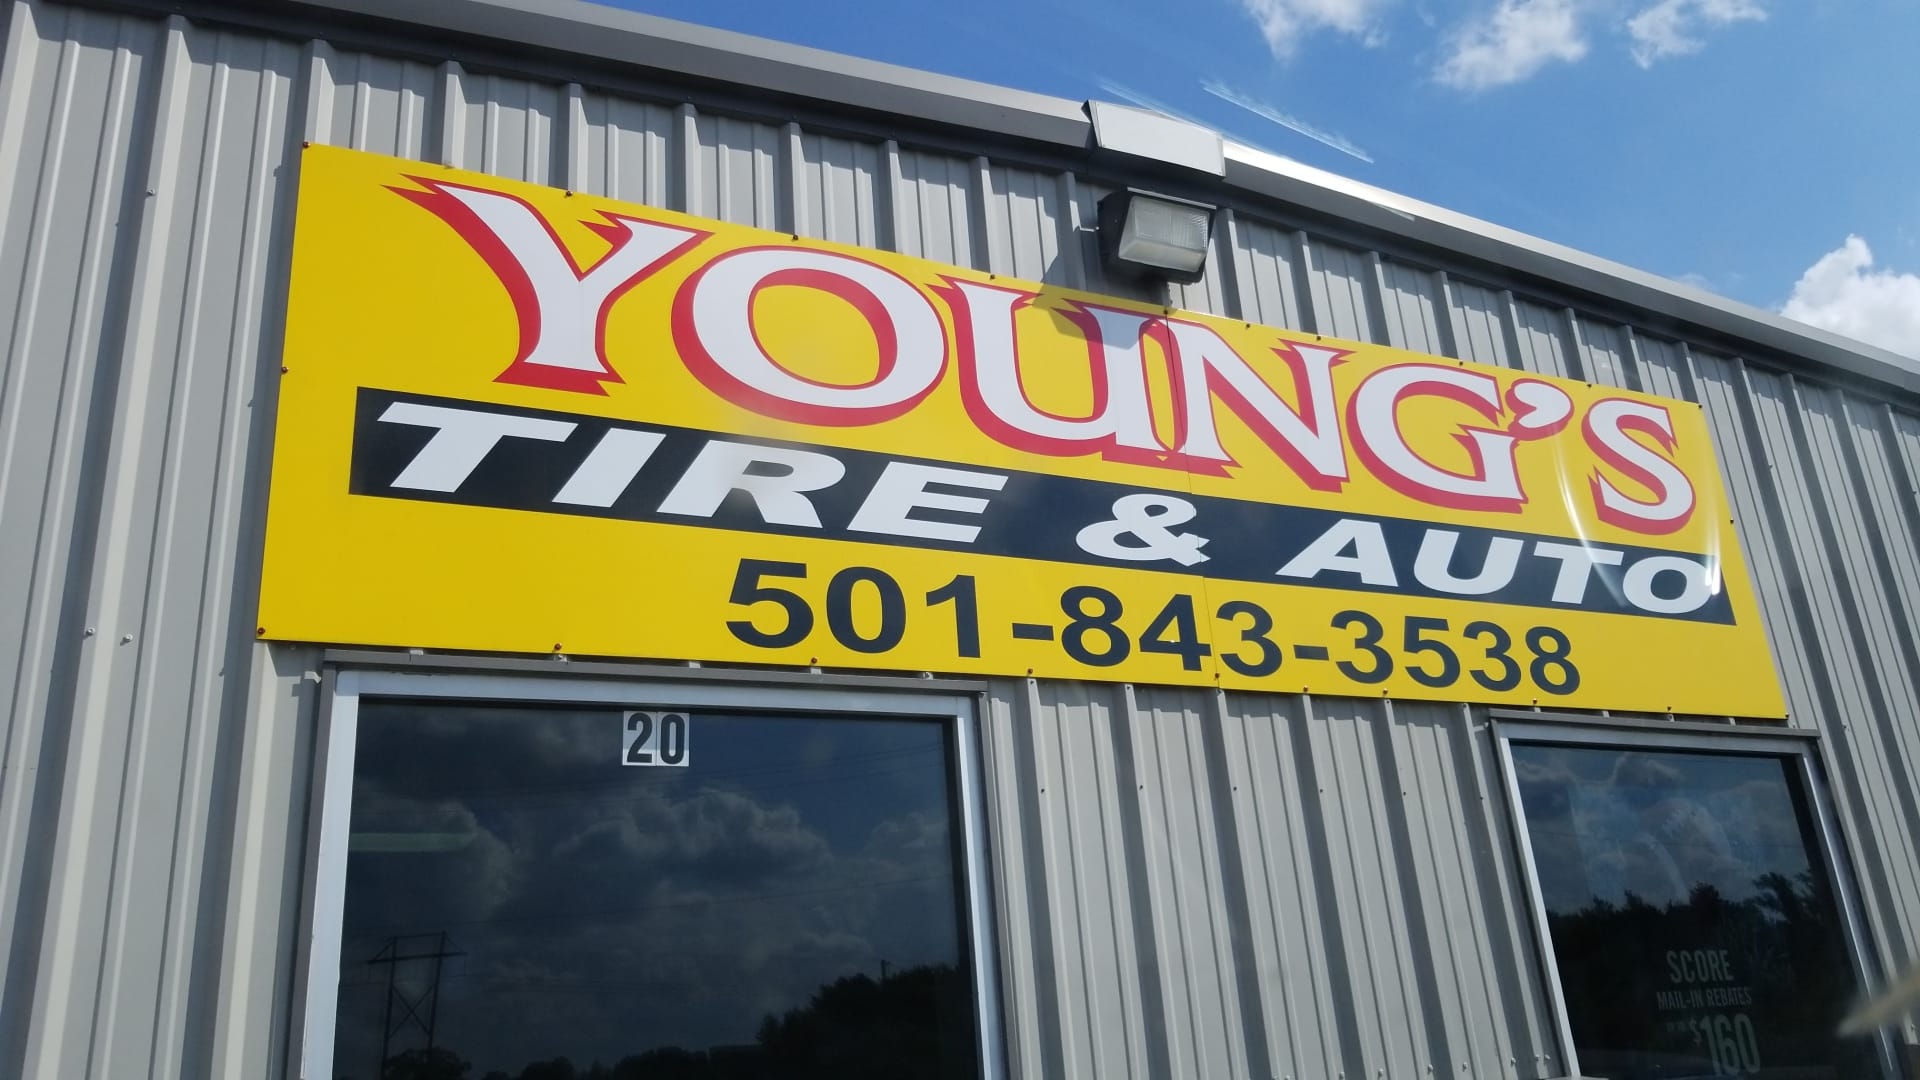 Young's Tire & Auto - Cabot, US, tire places near me